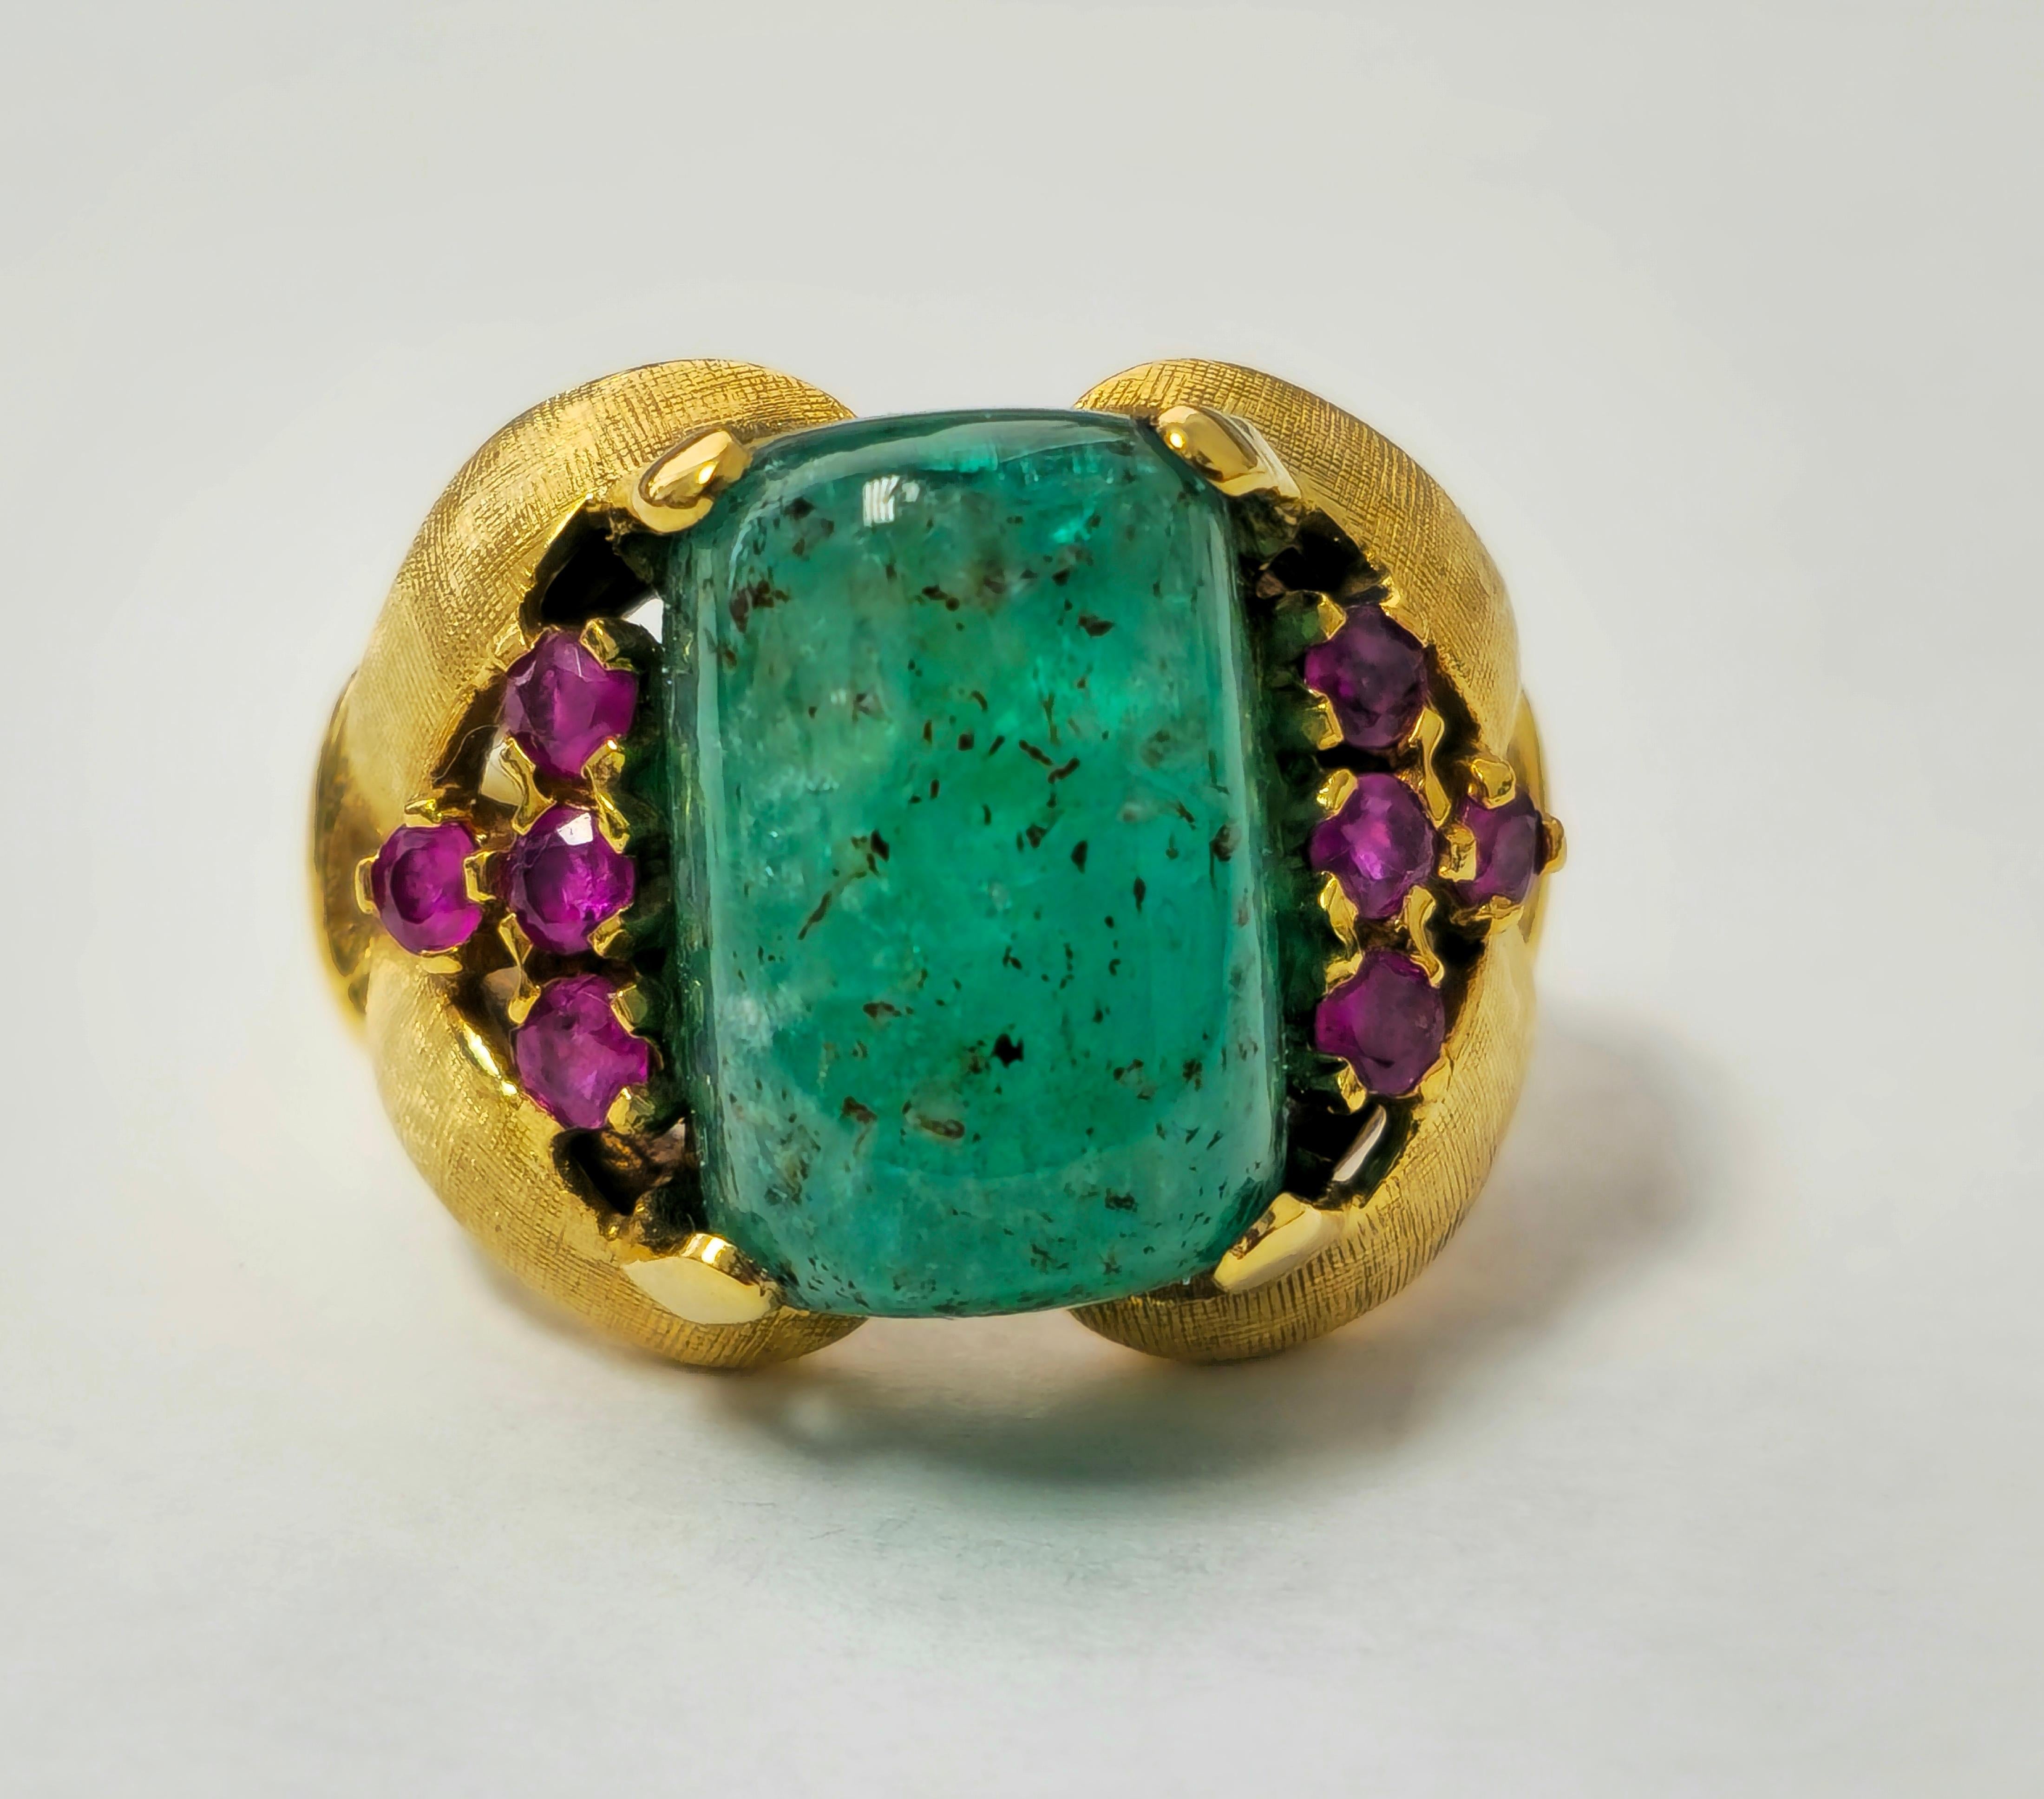 Fashioned in 14k yellow gold, this stunning vintage cocktail ring boasts a remarkable 12.11 carat sugar loaf-shaped Colombian emerald, paired with a total of 0.30 carats of round-cut rubies, all 100% natural earth mined gems. With a total weight of